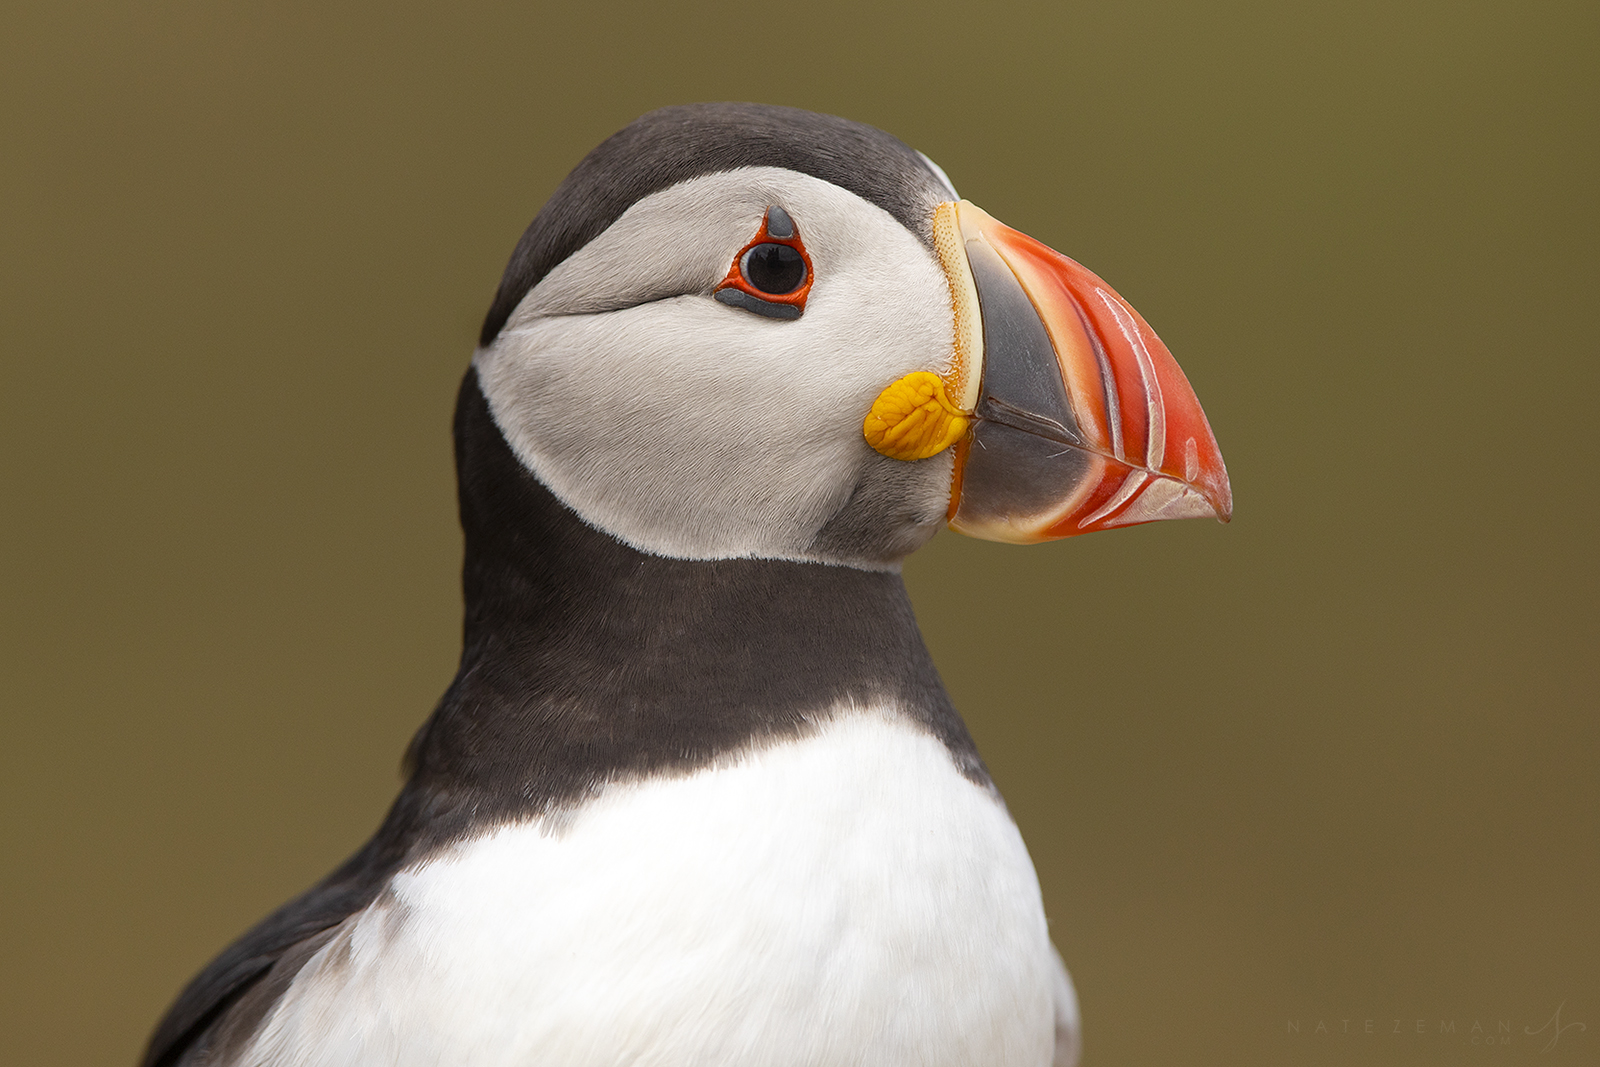 Skomer is a small island off the western coast of Wales. Its absence of terrestrial predators makes Skomer a crucially important...